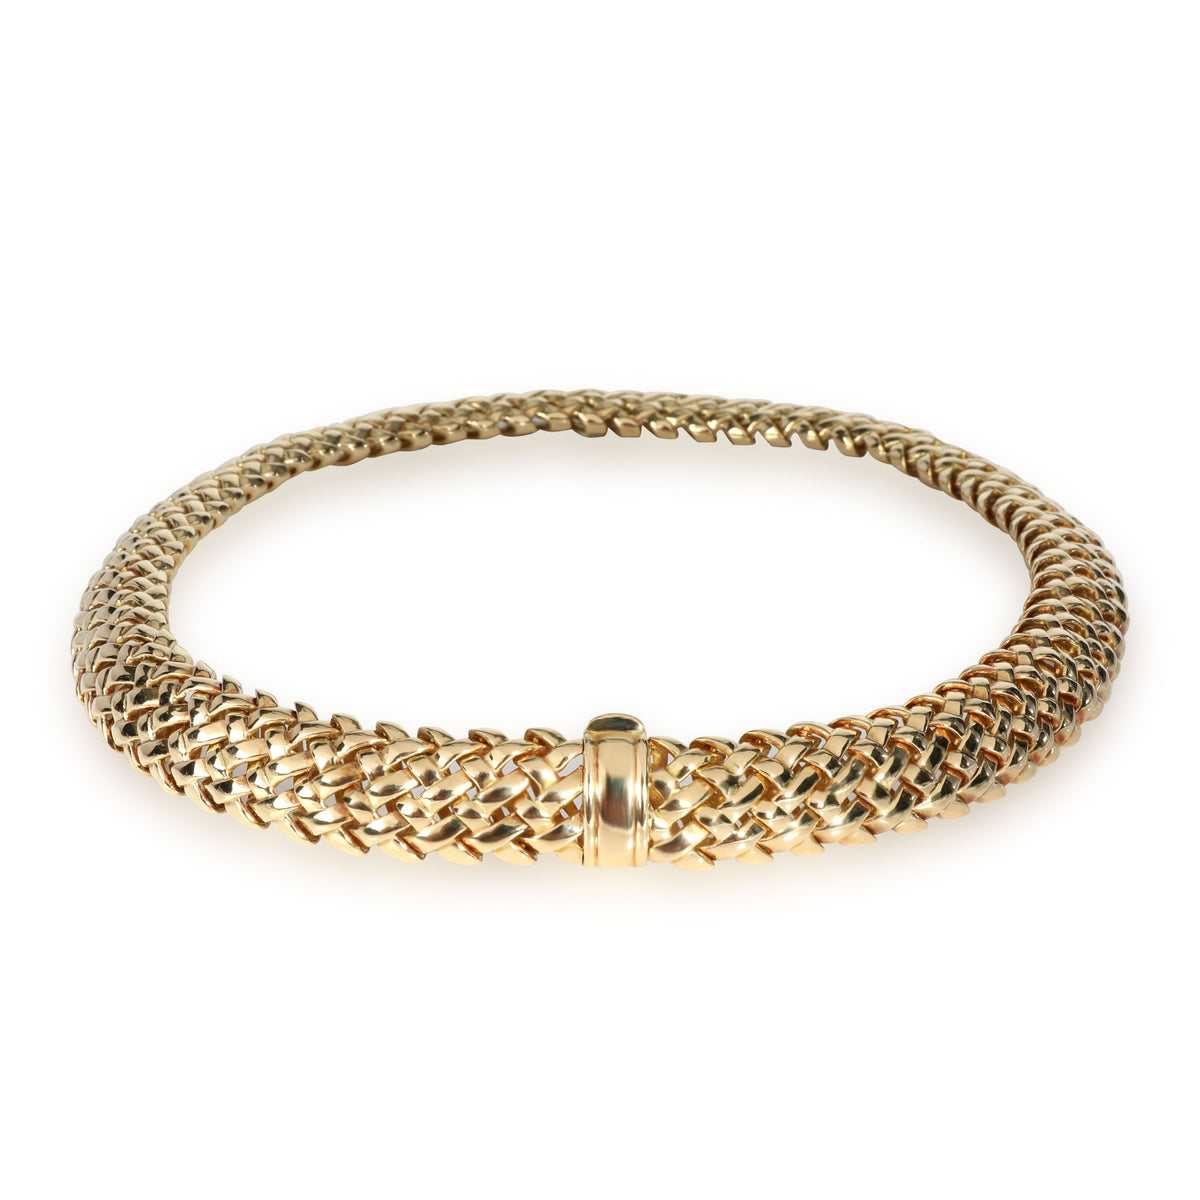 Tiffany & Co. Vannerie Necklace in 18K Woven Yellow Gold